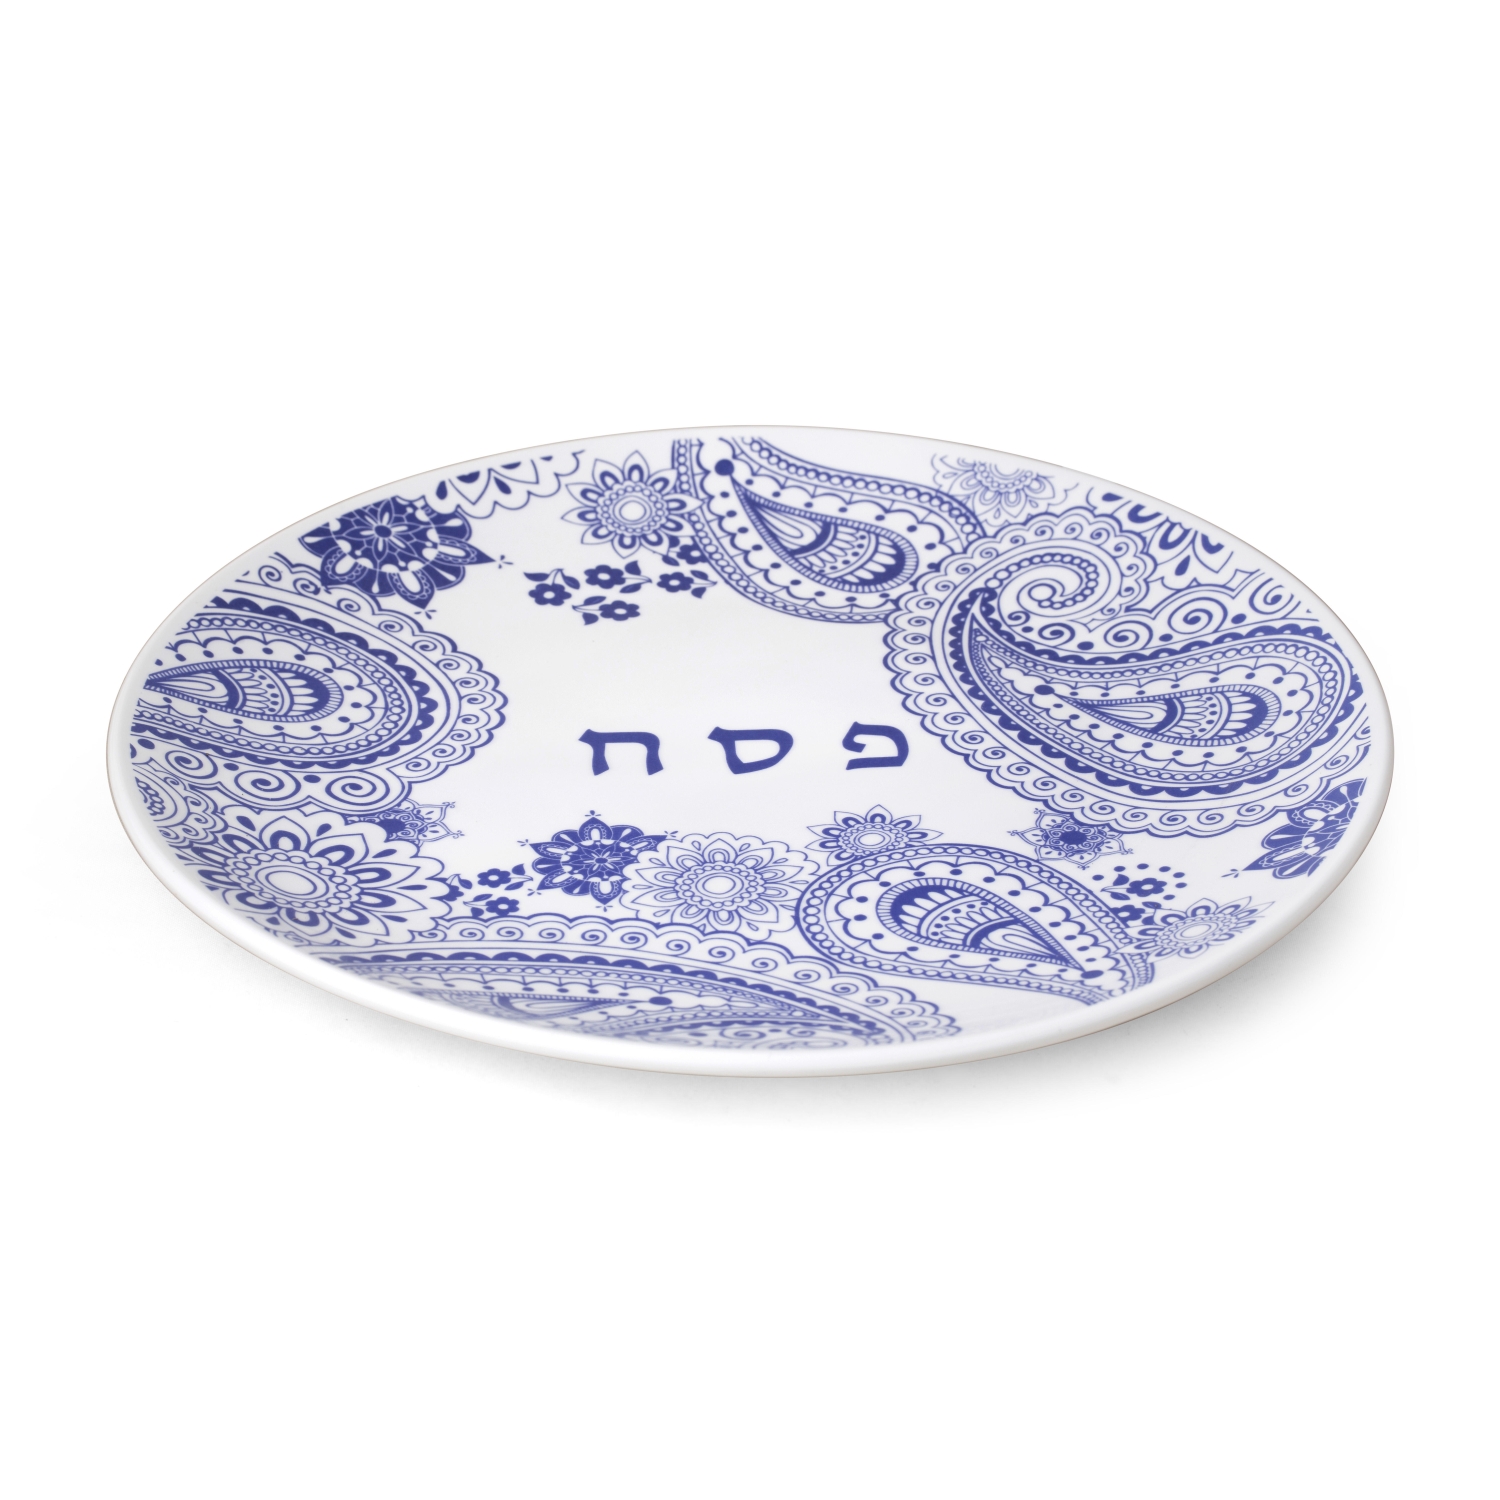 Ceramic Seder Plate With Paisley Design By Barbara Shaw (Choice of Colors) - 1